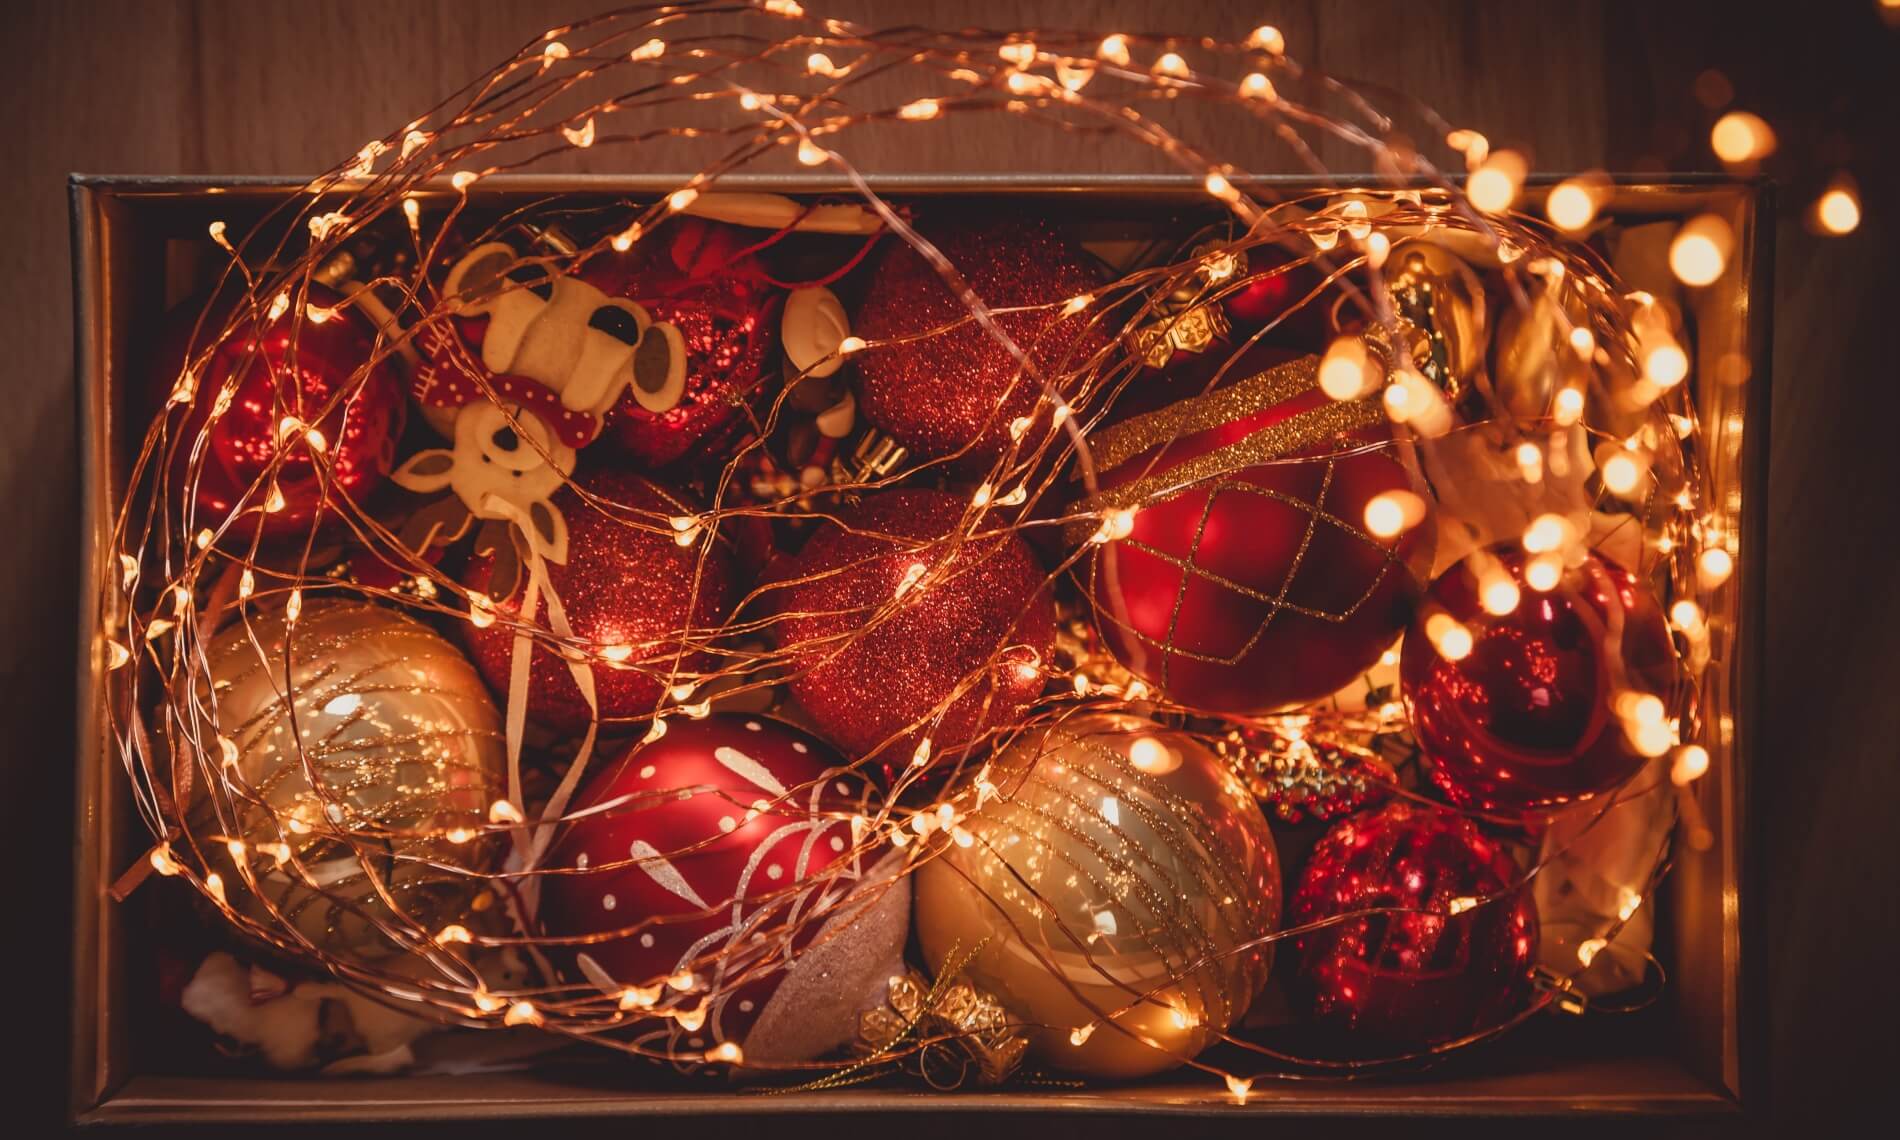 Lit up yellow Christmas lights with red and gold bauble balls in a box